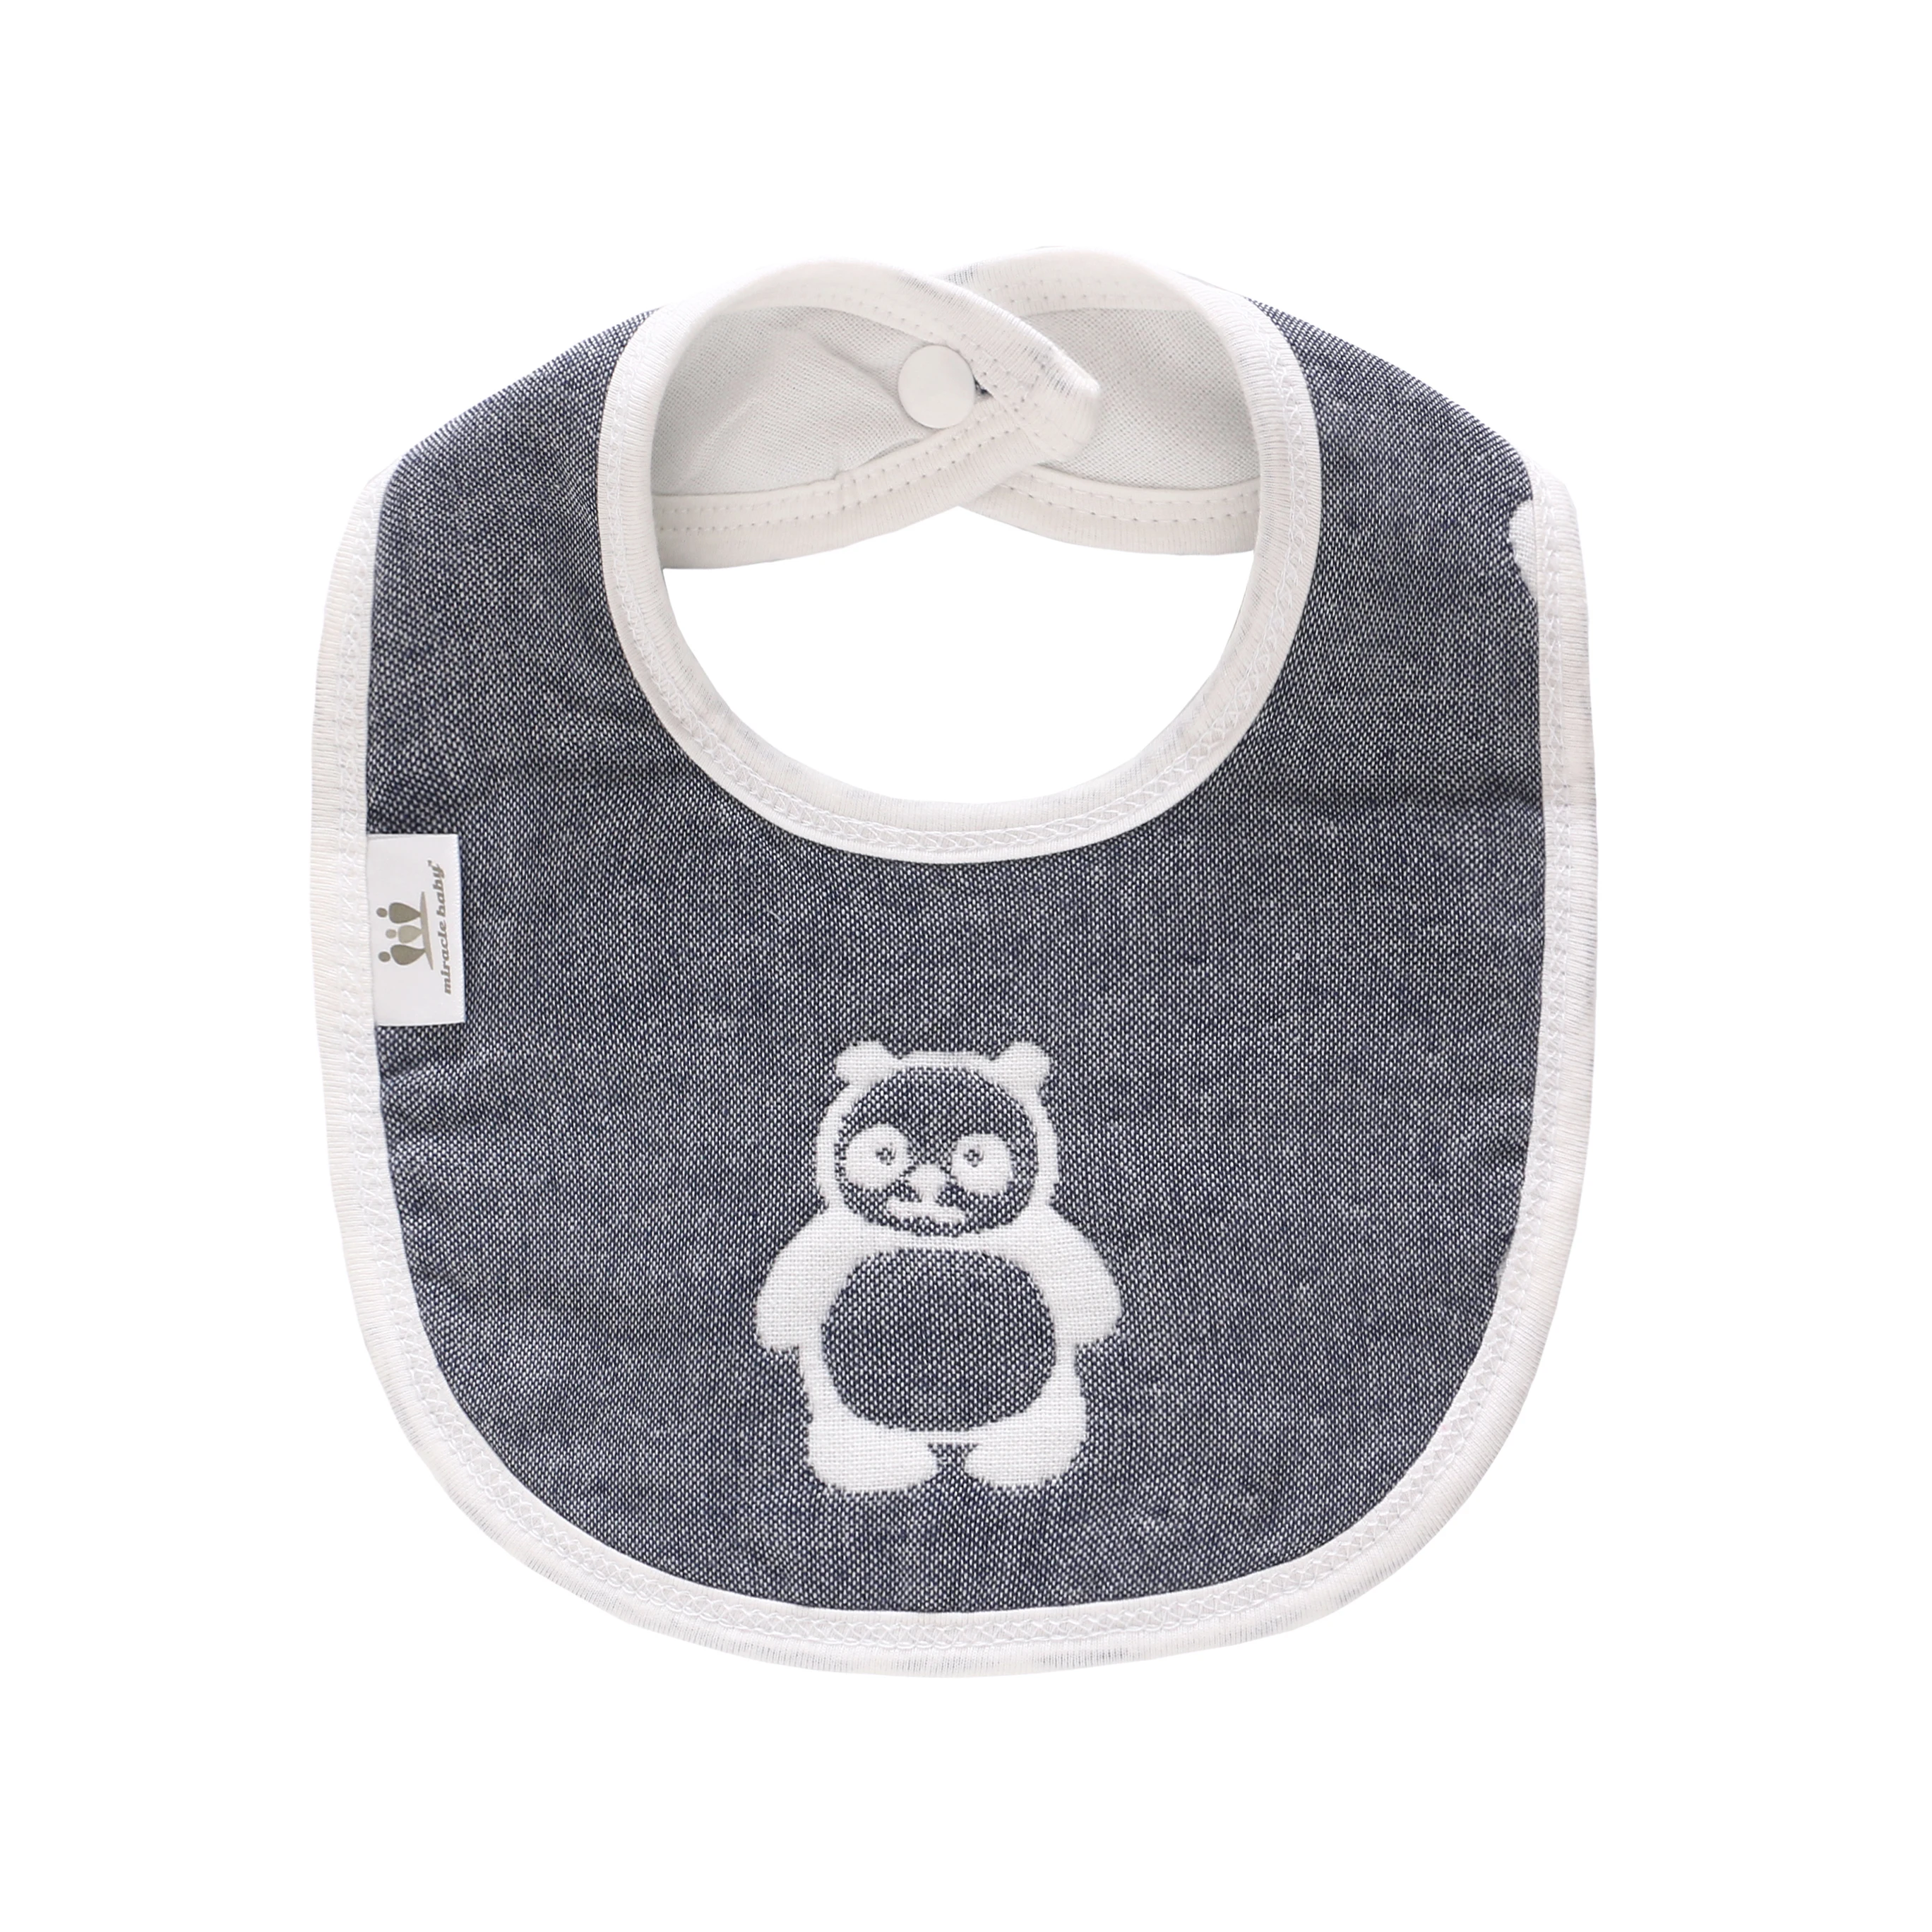 

Big Sale! Miracle Baby cheap washable cute design baby bandana drool bibs with teether 6 layers 100% soft cotton muslin baby bib